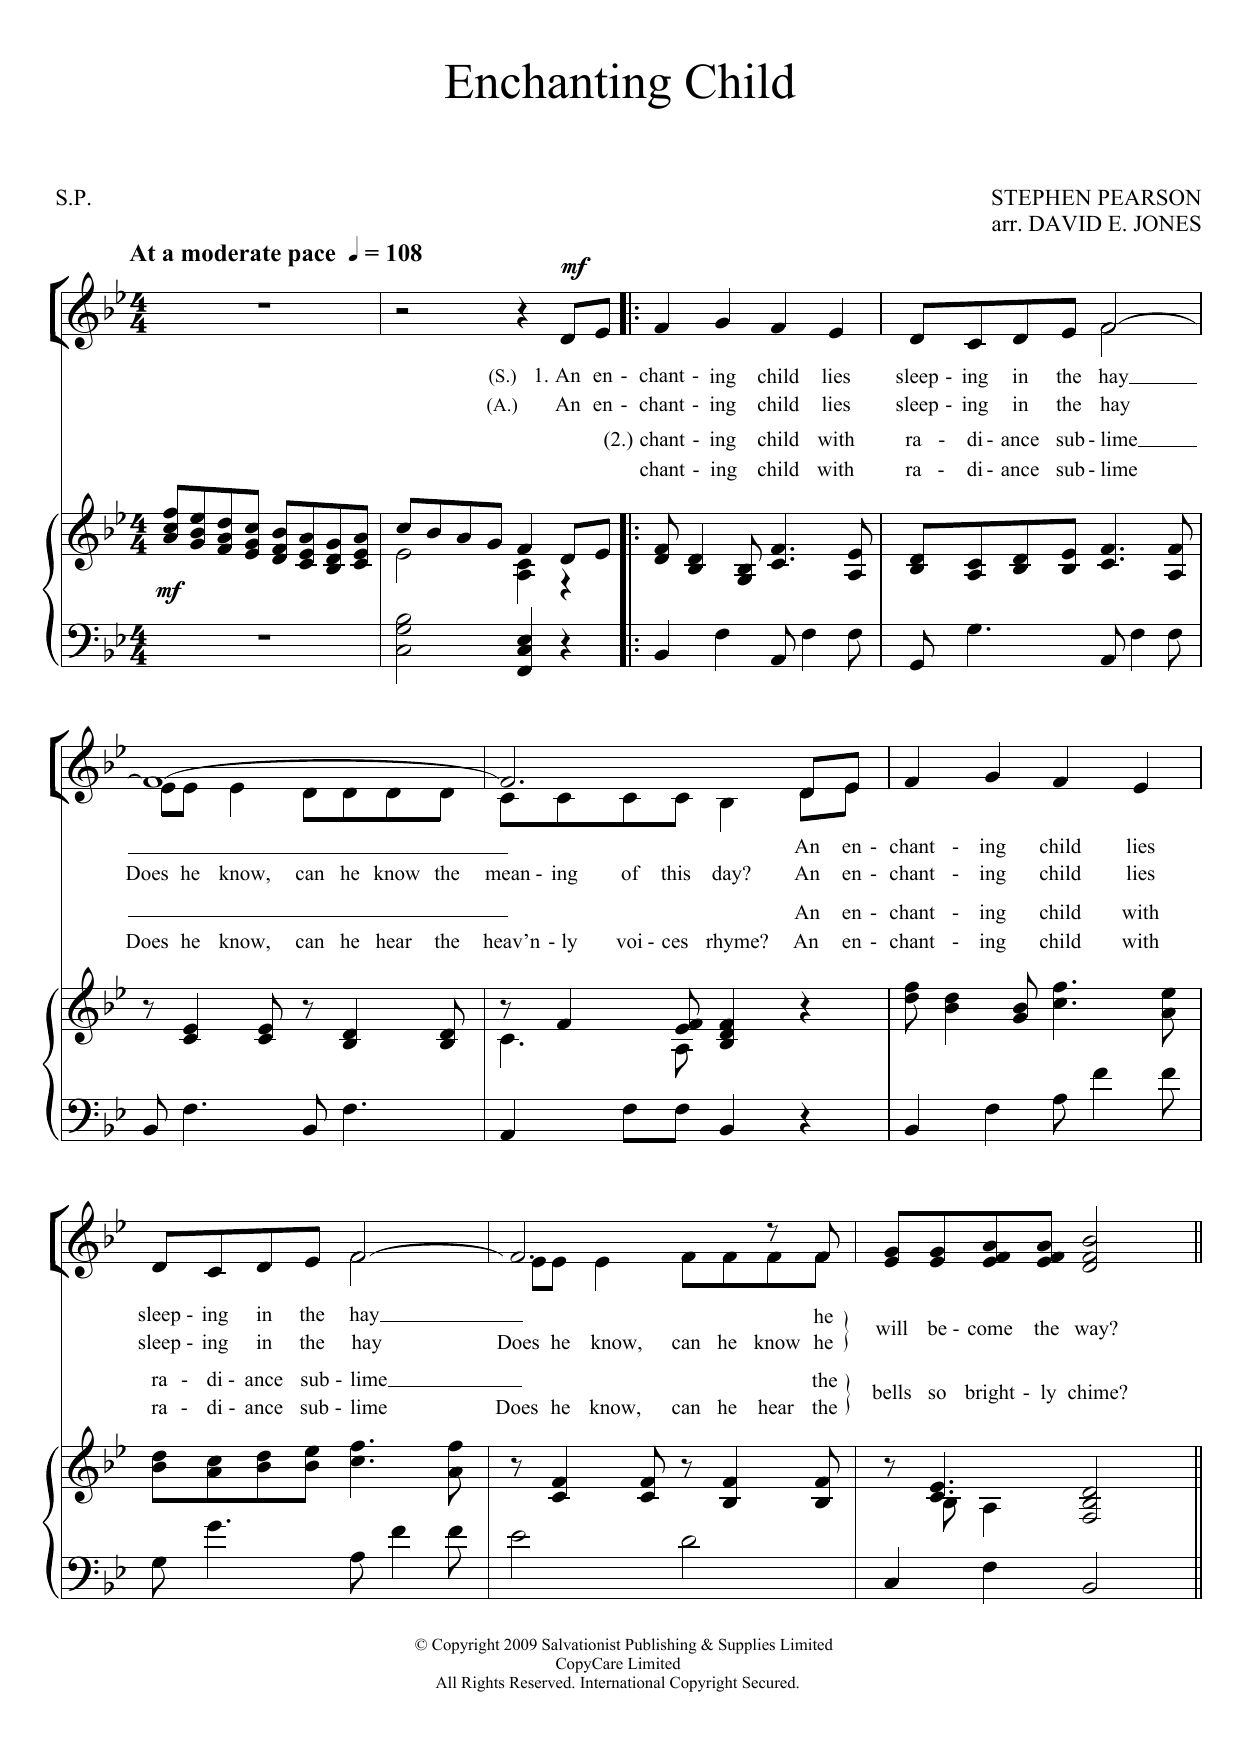 Download The Salvation Army Enchanting Child Sheet Music